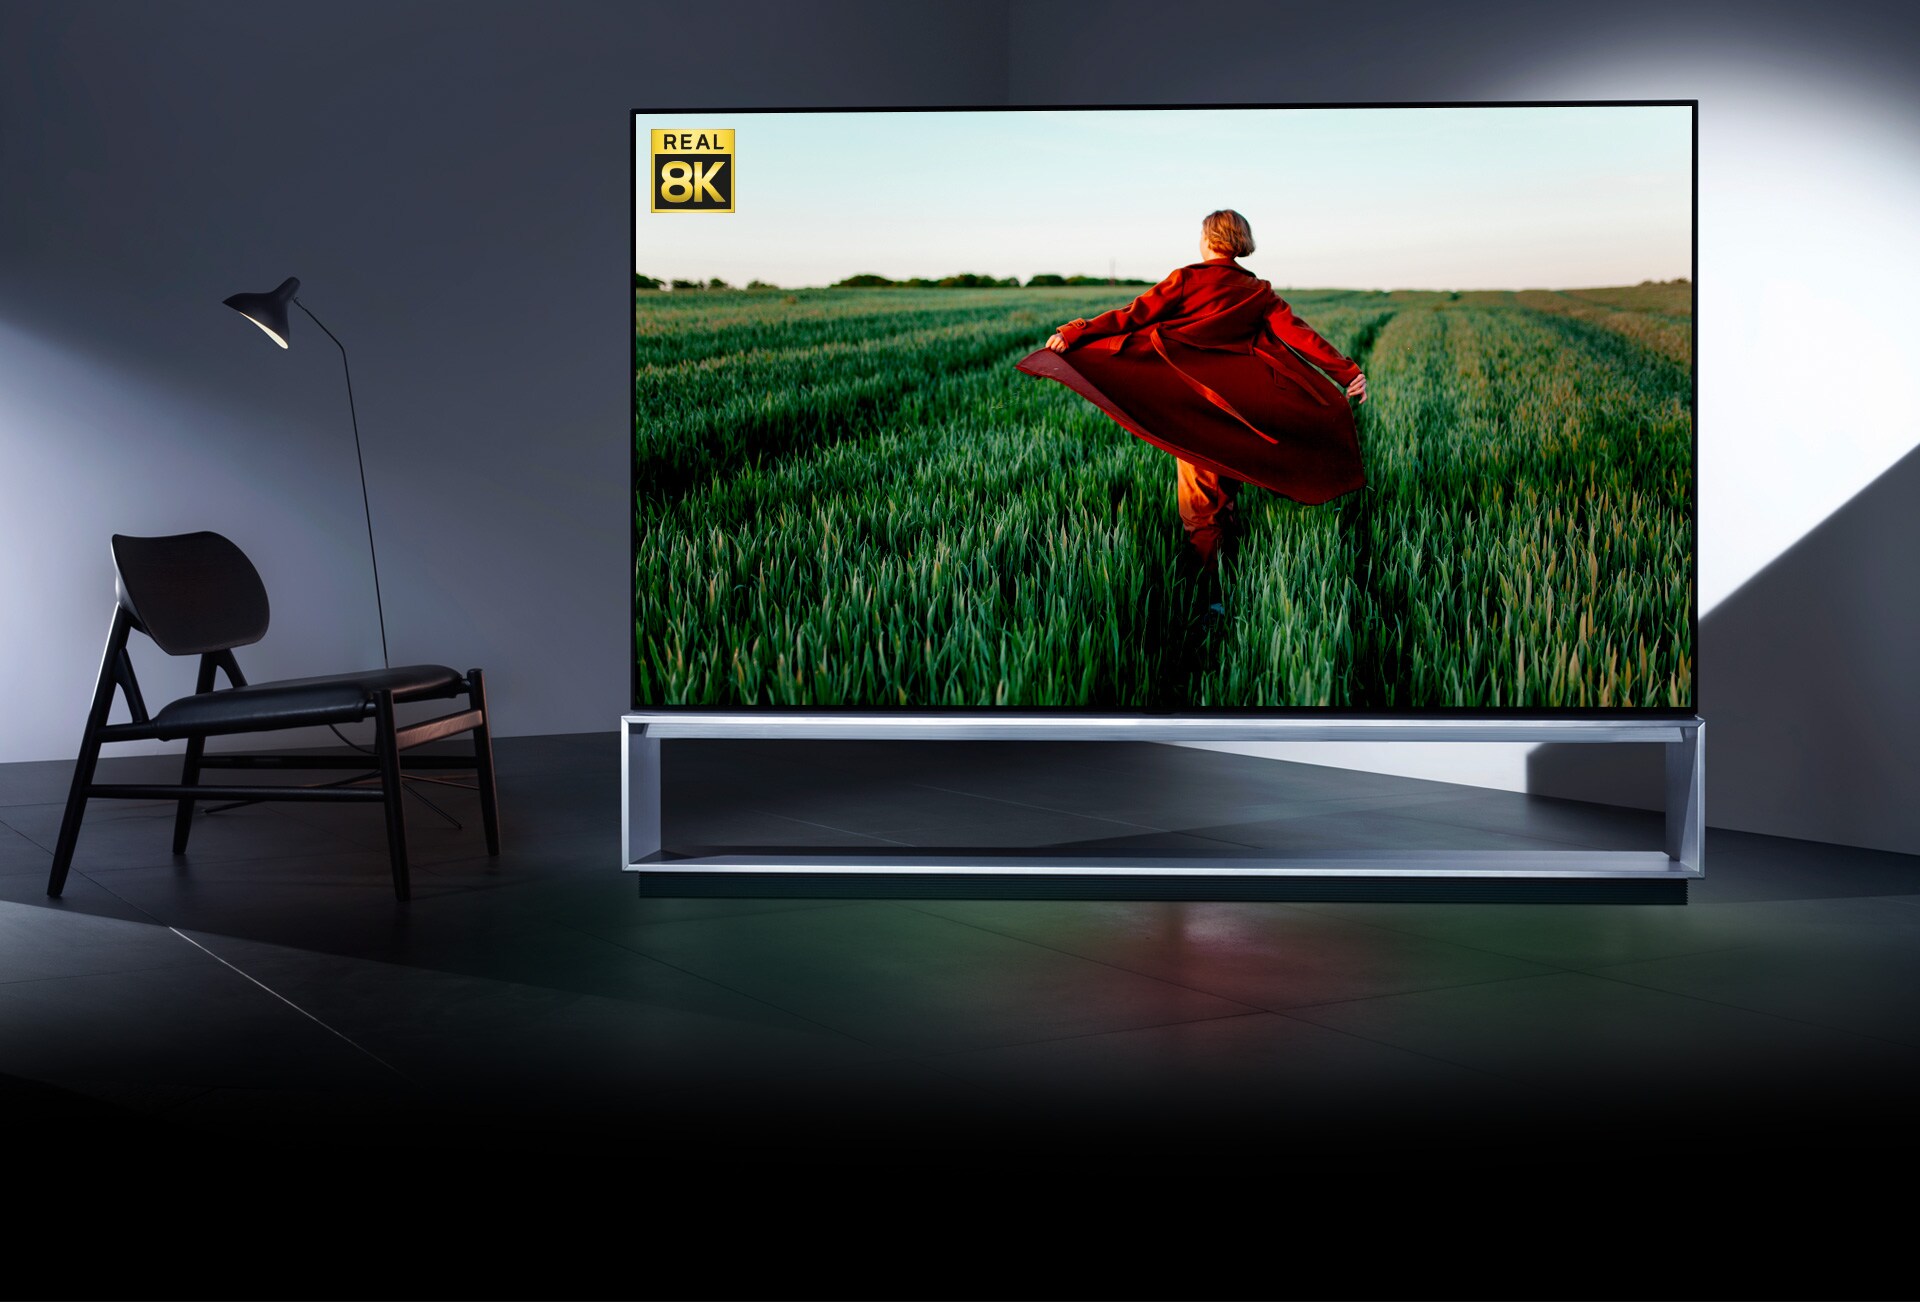 An LG OLED 8K TV, showing 8K realism via an image of a woman in a red trench coat running in a green rice field